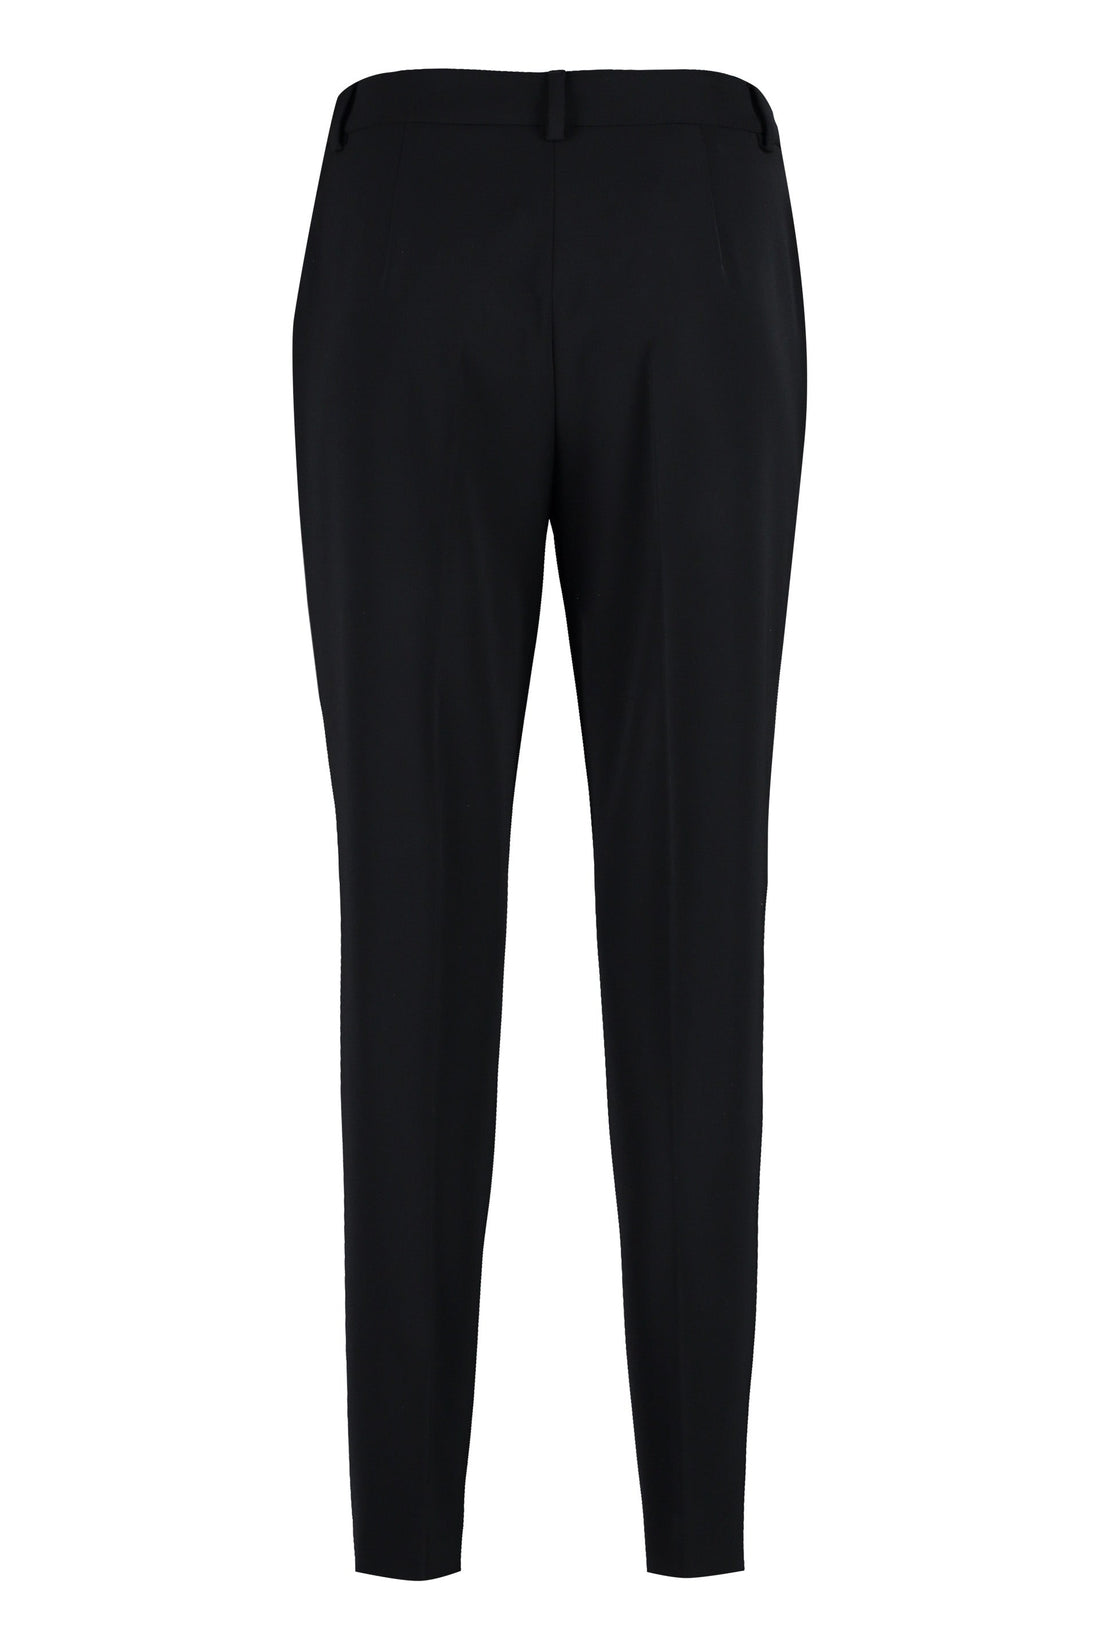 Boutique Moschino-OUTLET-SALE-Crepe pants with straight legs-ARCHIVIST